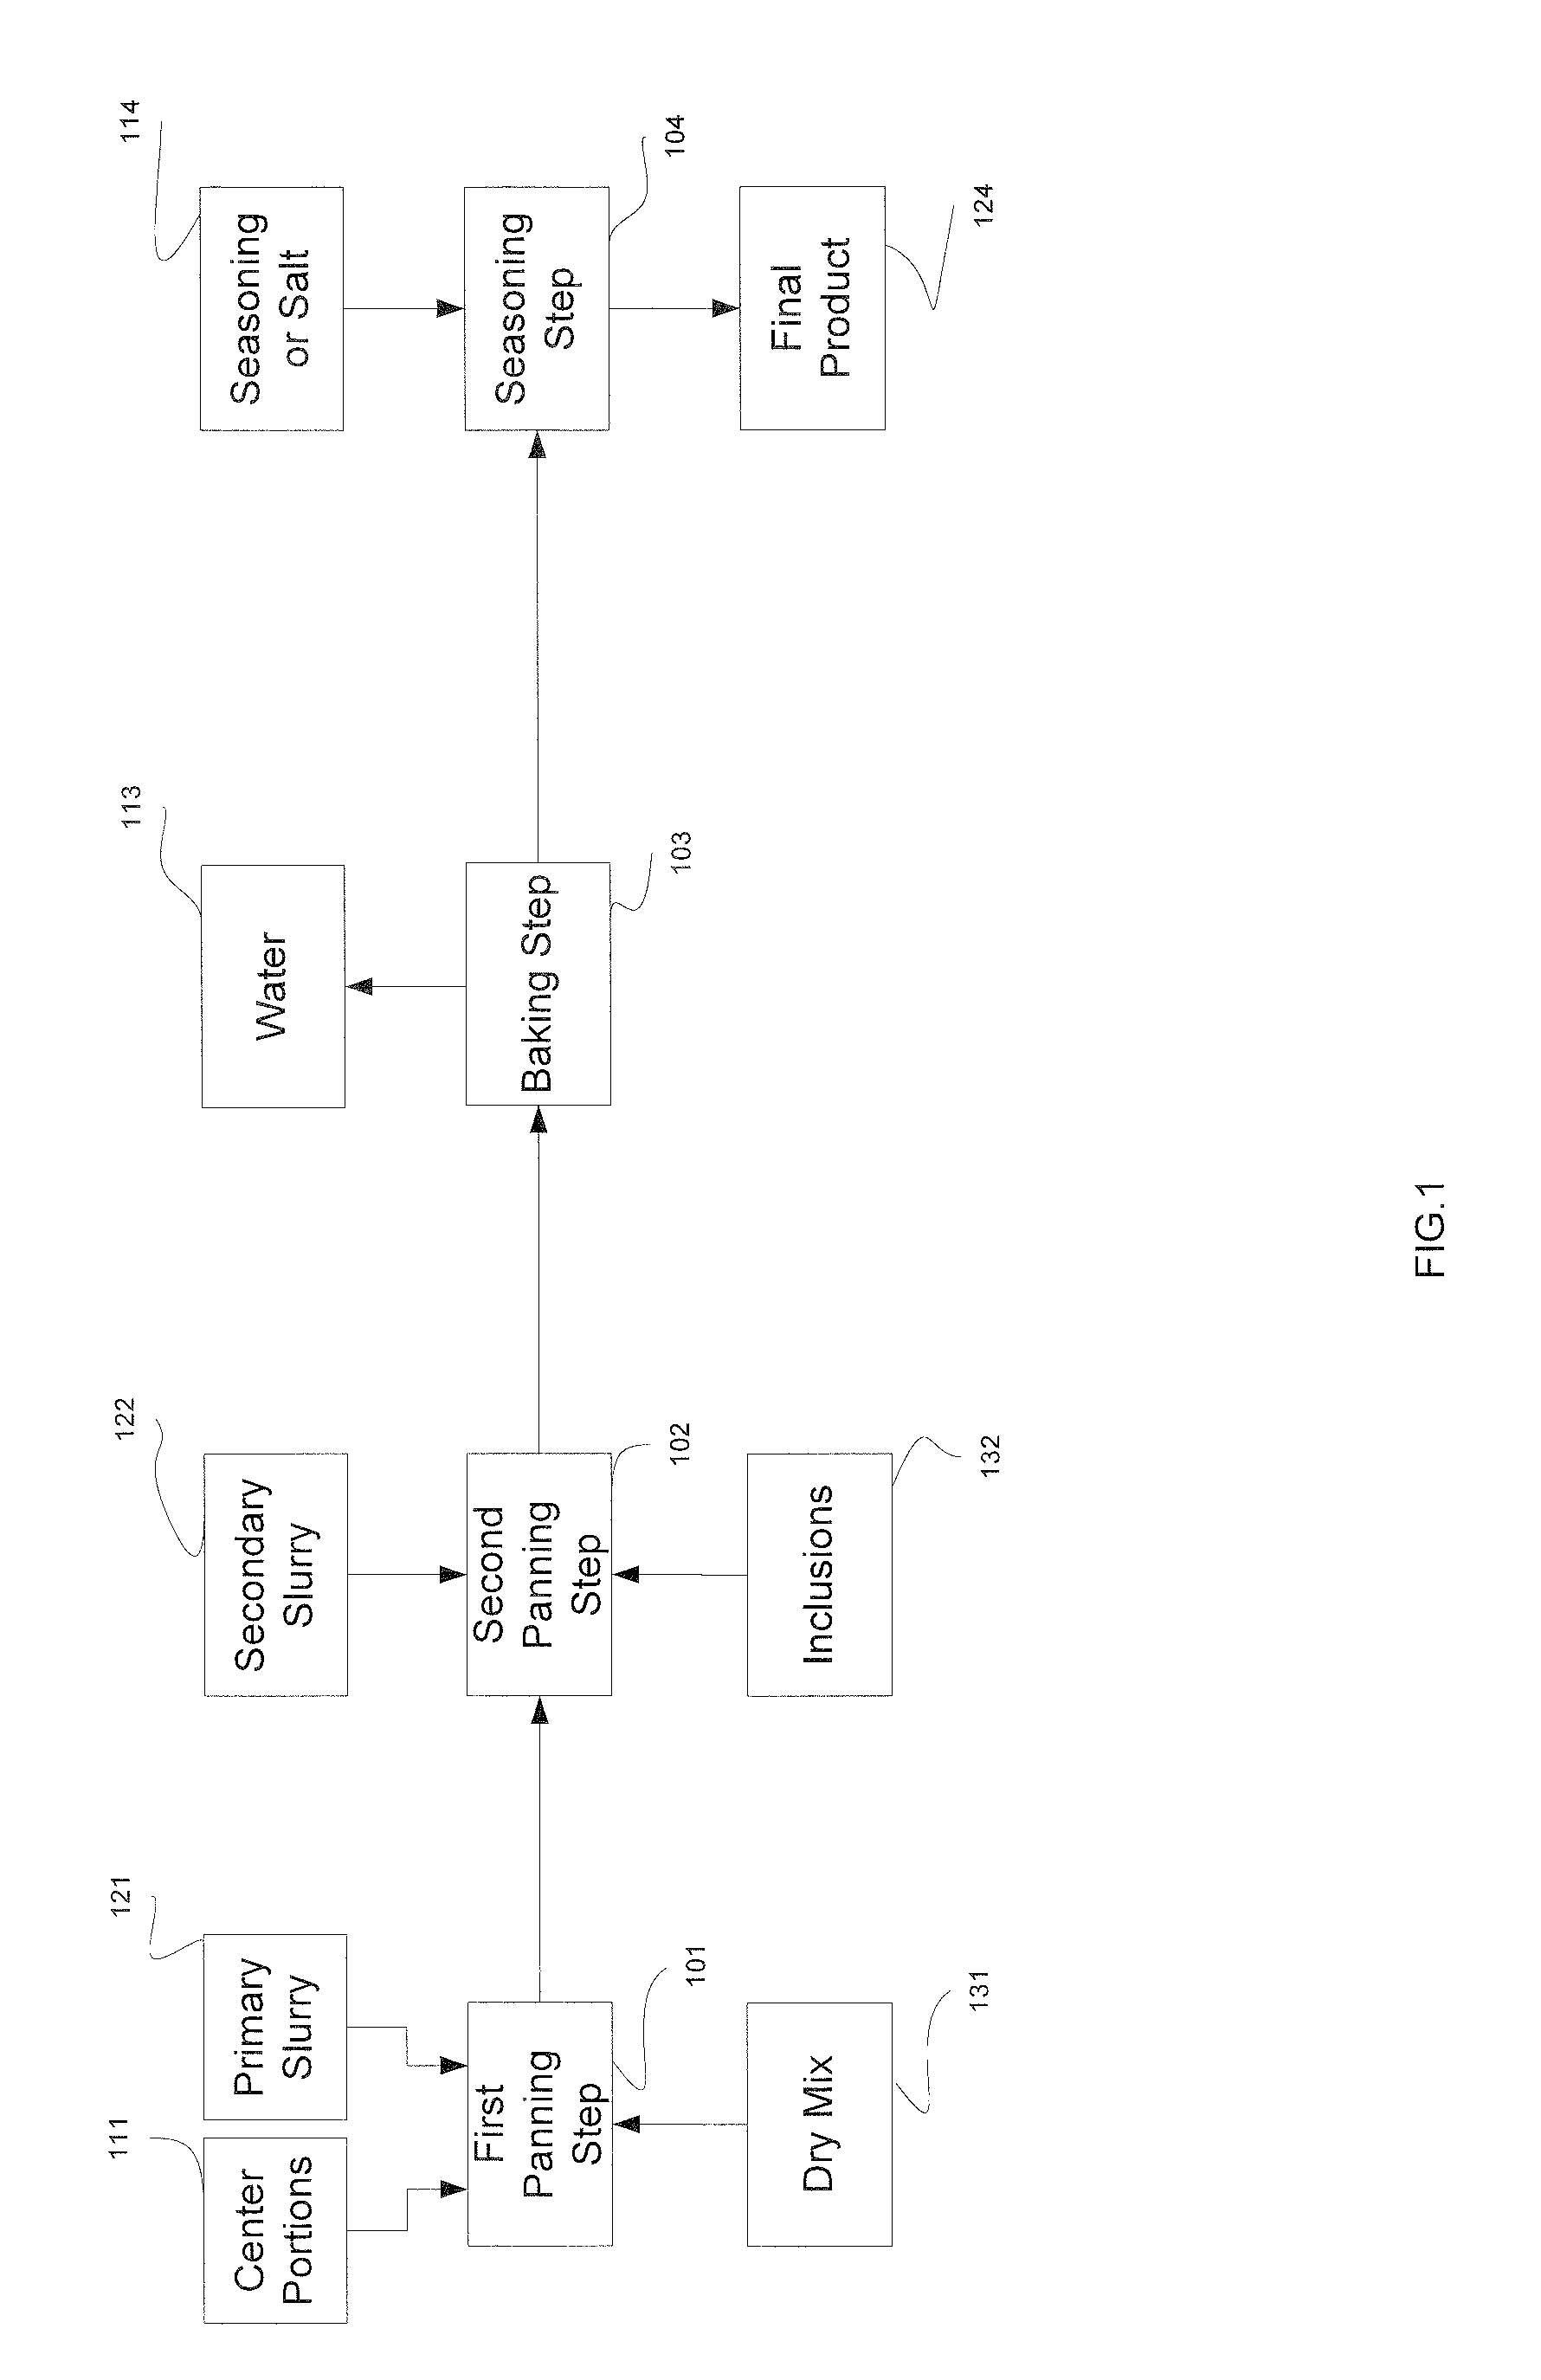 Method for producing a crunchy food product